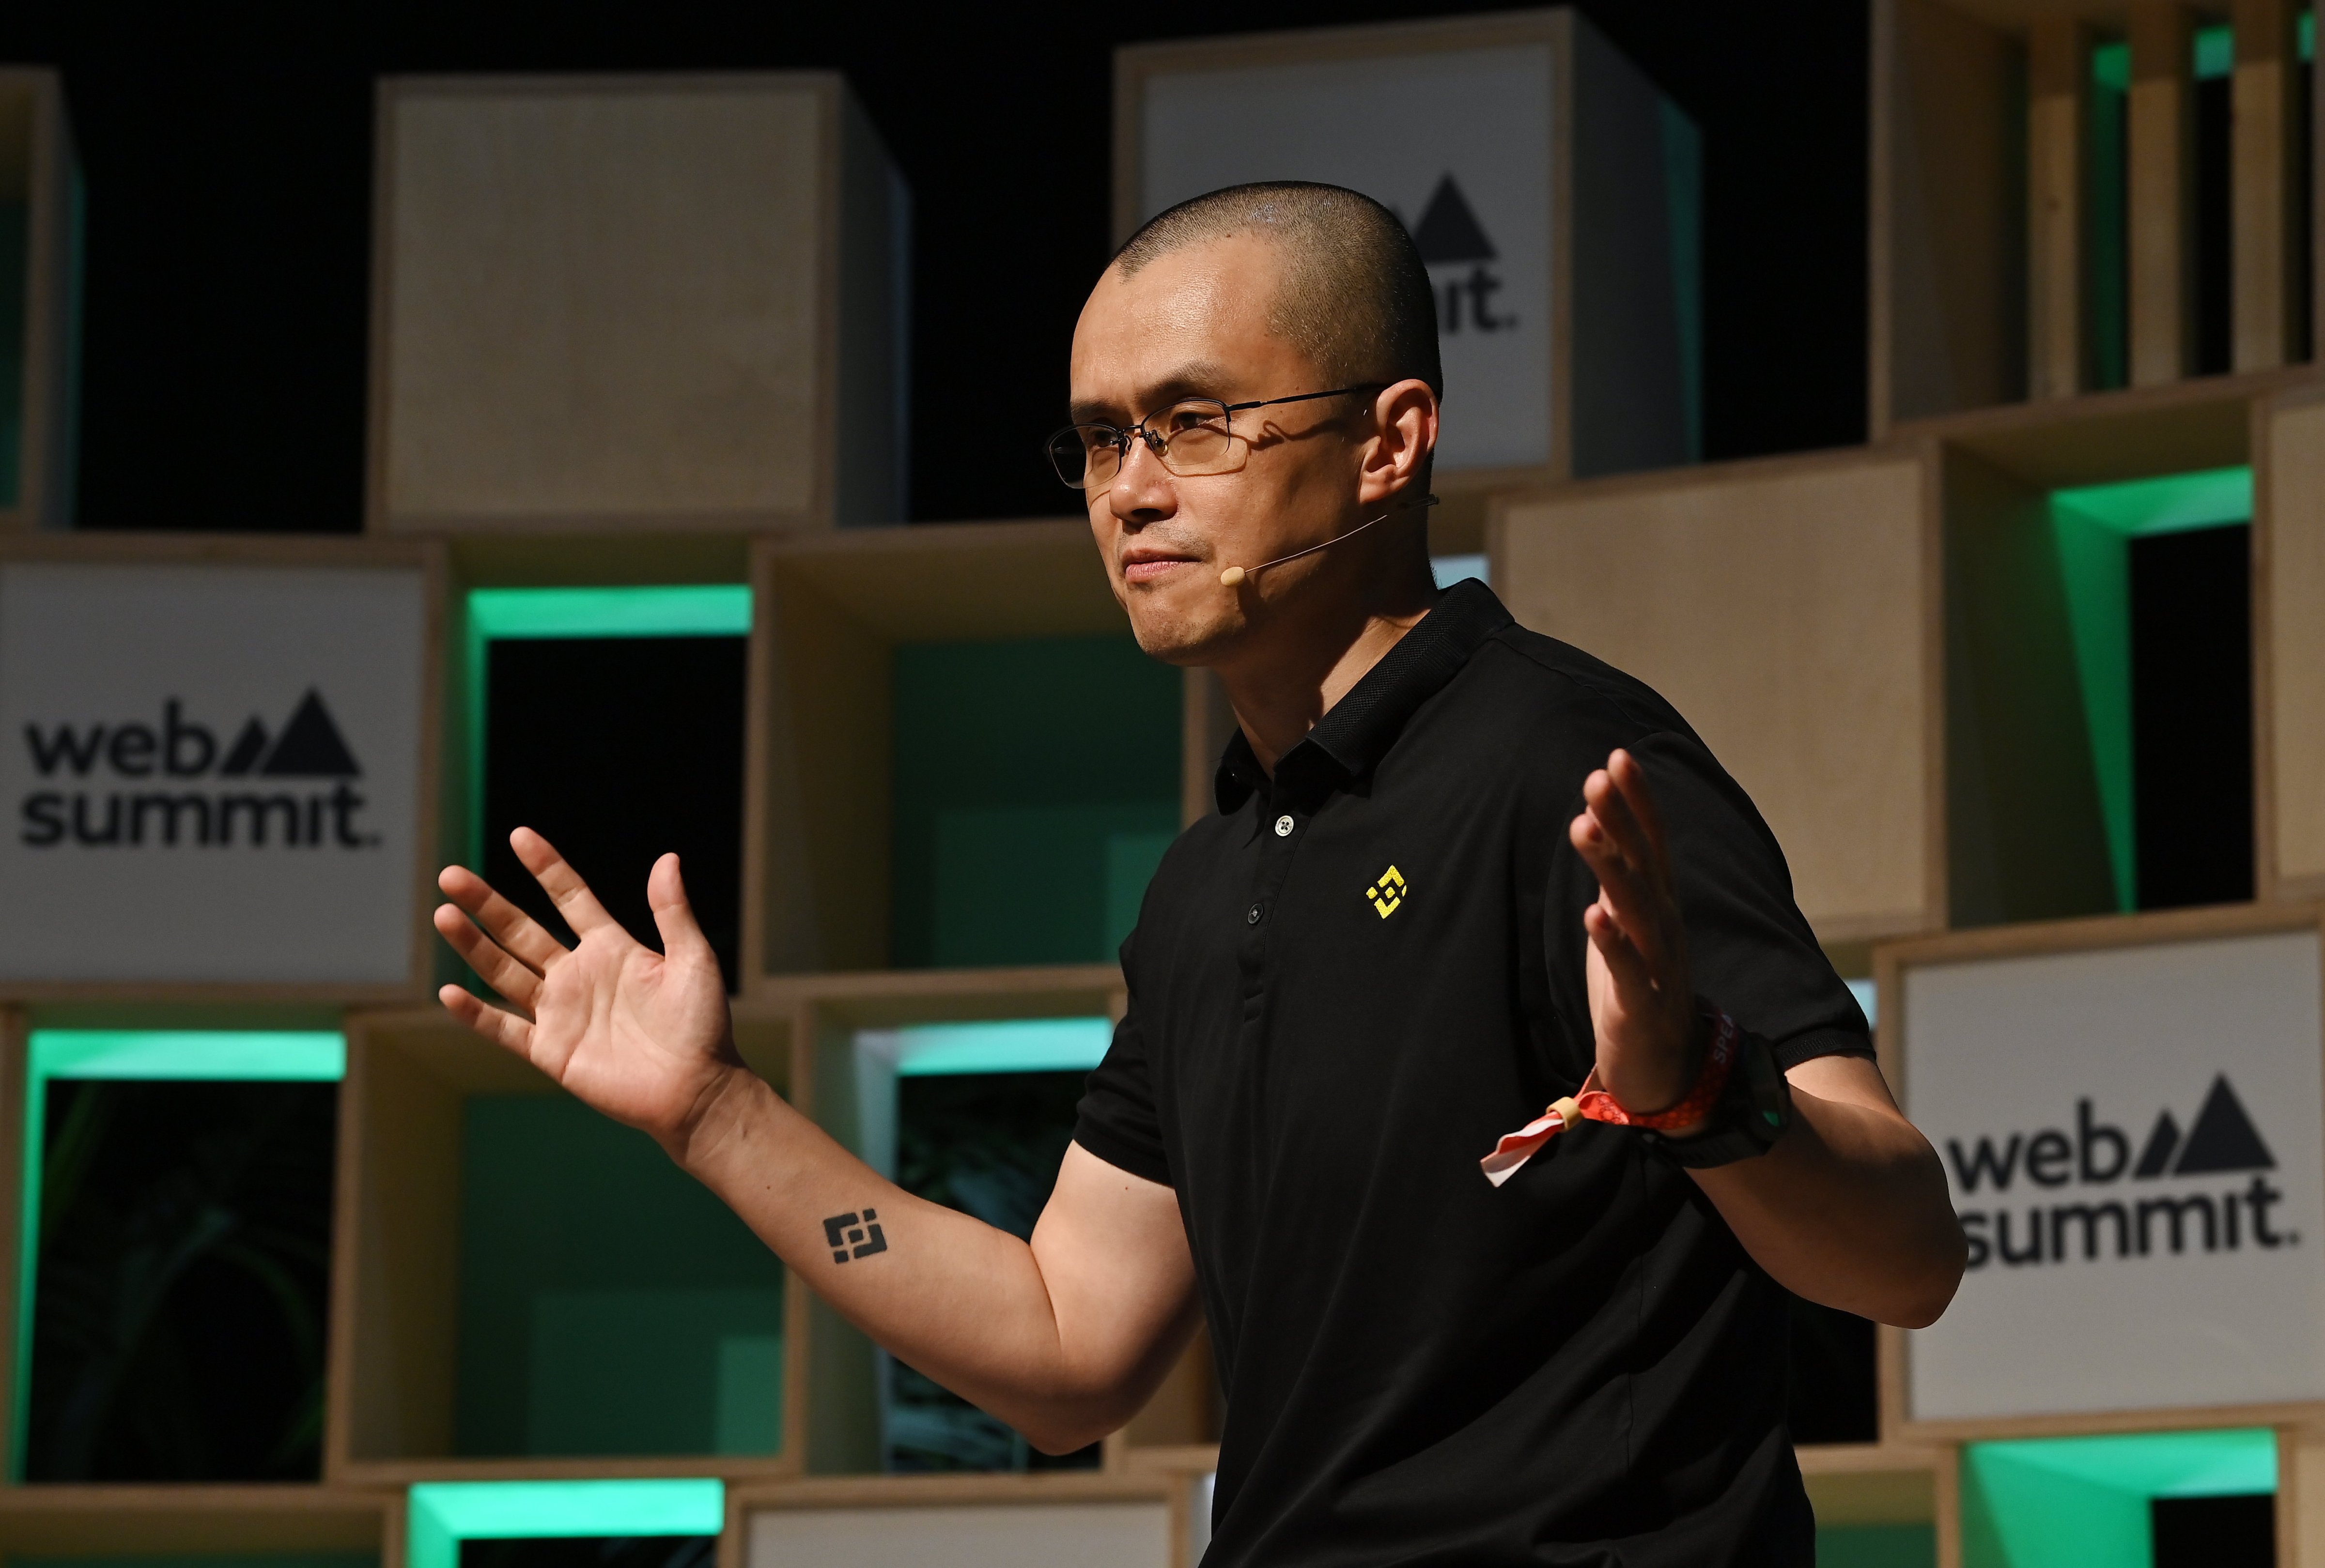 Changpeng Zhao, the co-founder and CEO of Binance, at the Web Summit 2022 in Lisbon, Portugal. (Piaras Ó Mídheach/Sportsfile for Web Summit--Getty Images)